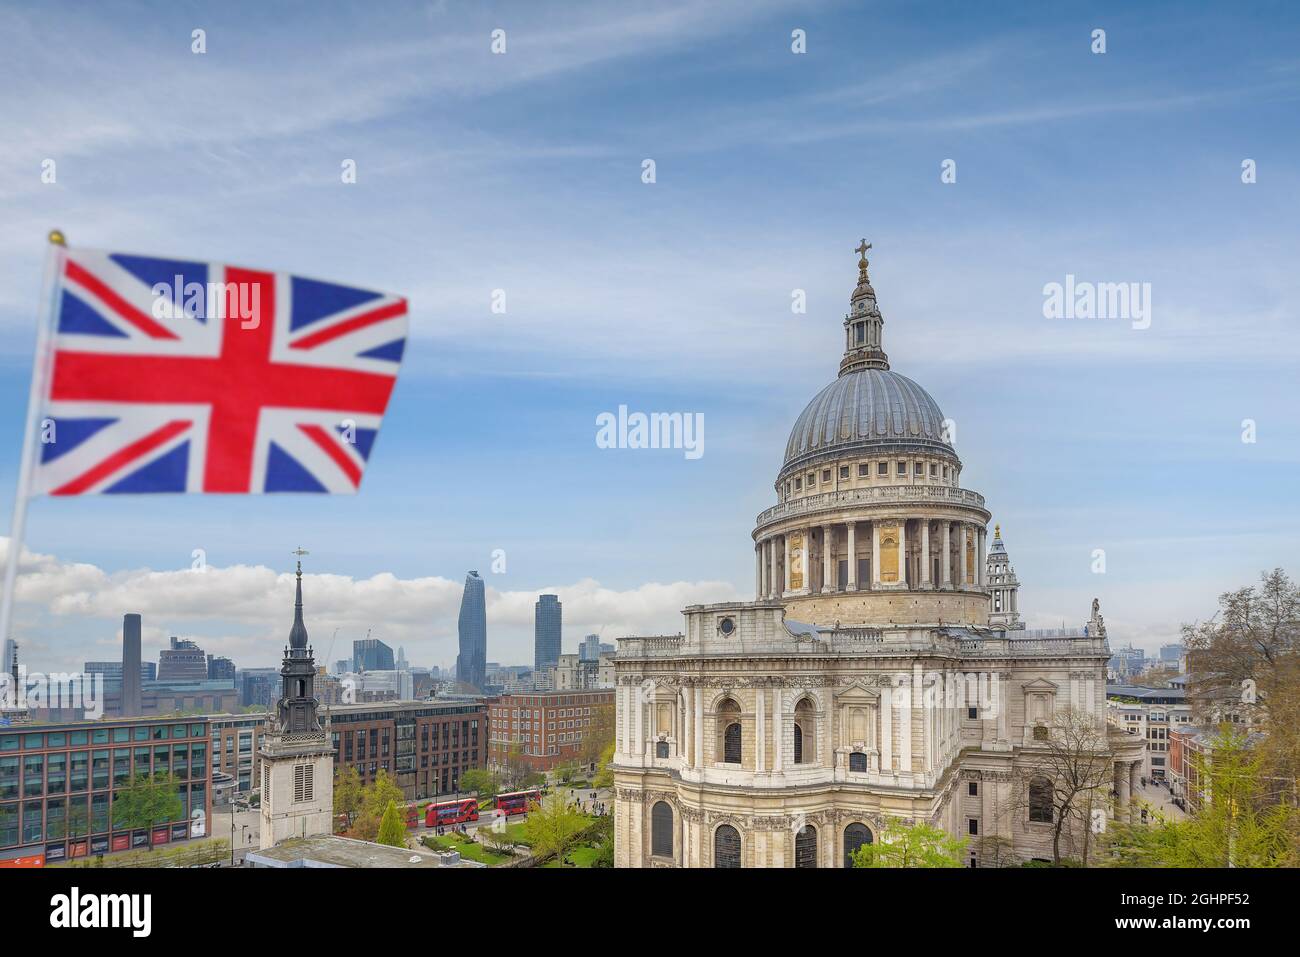 London, England - Sep. 7, 2021 - A Union Jack flag flies in the wind with a view of St Paul's Cathedral in the background. Stock Photo